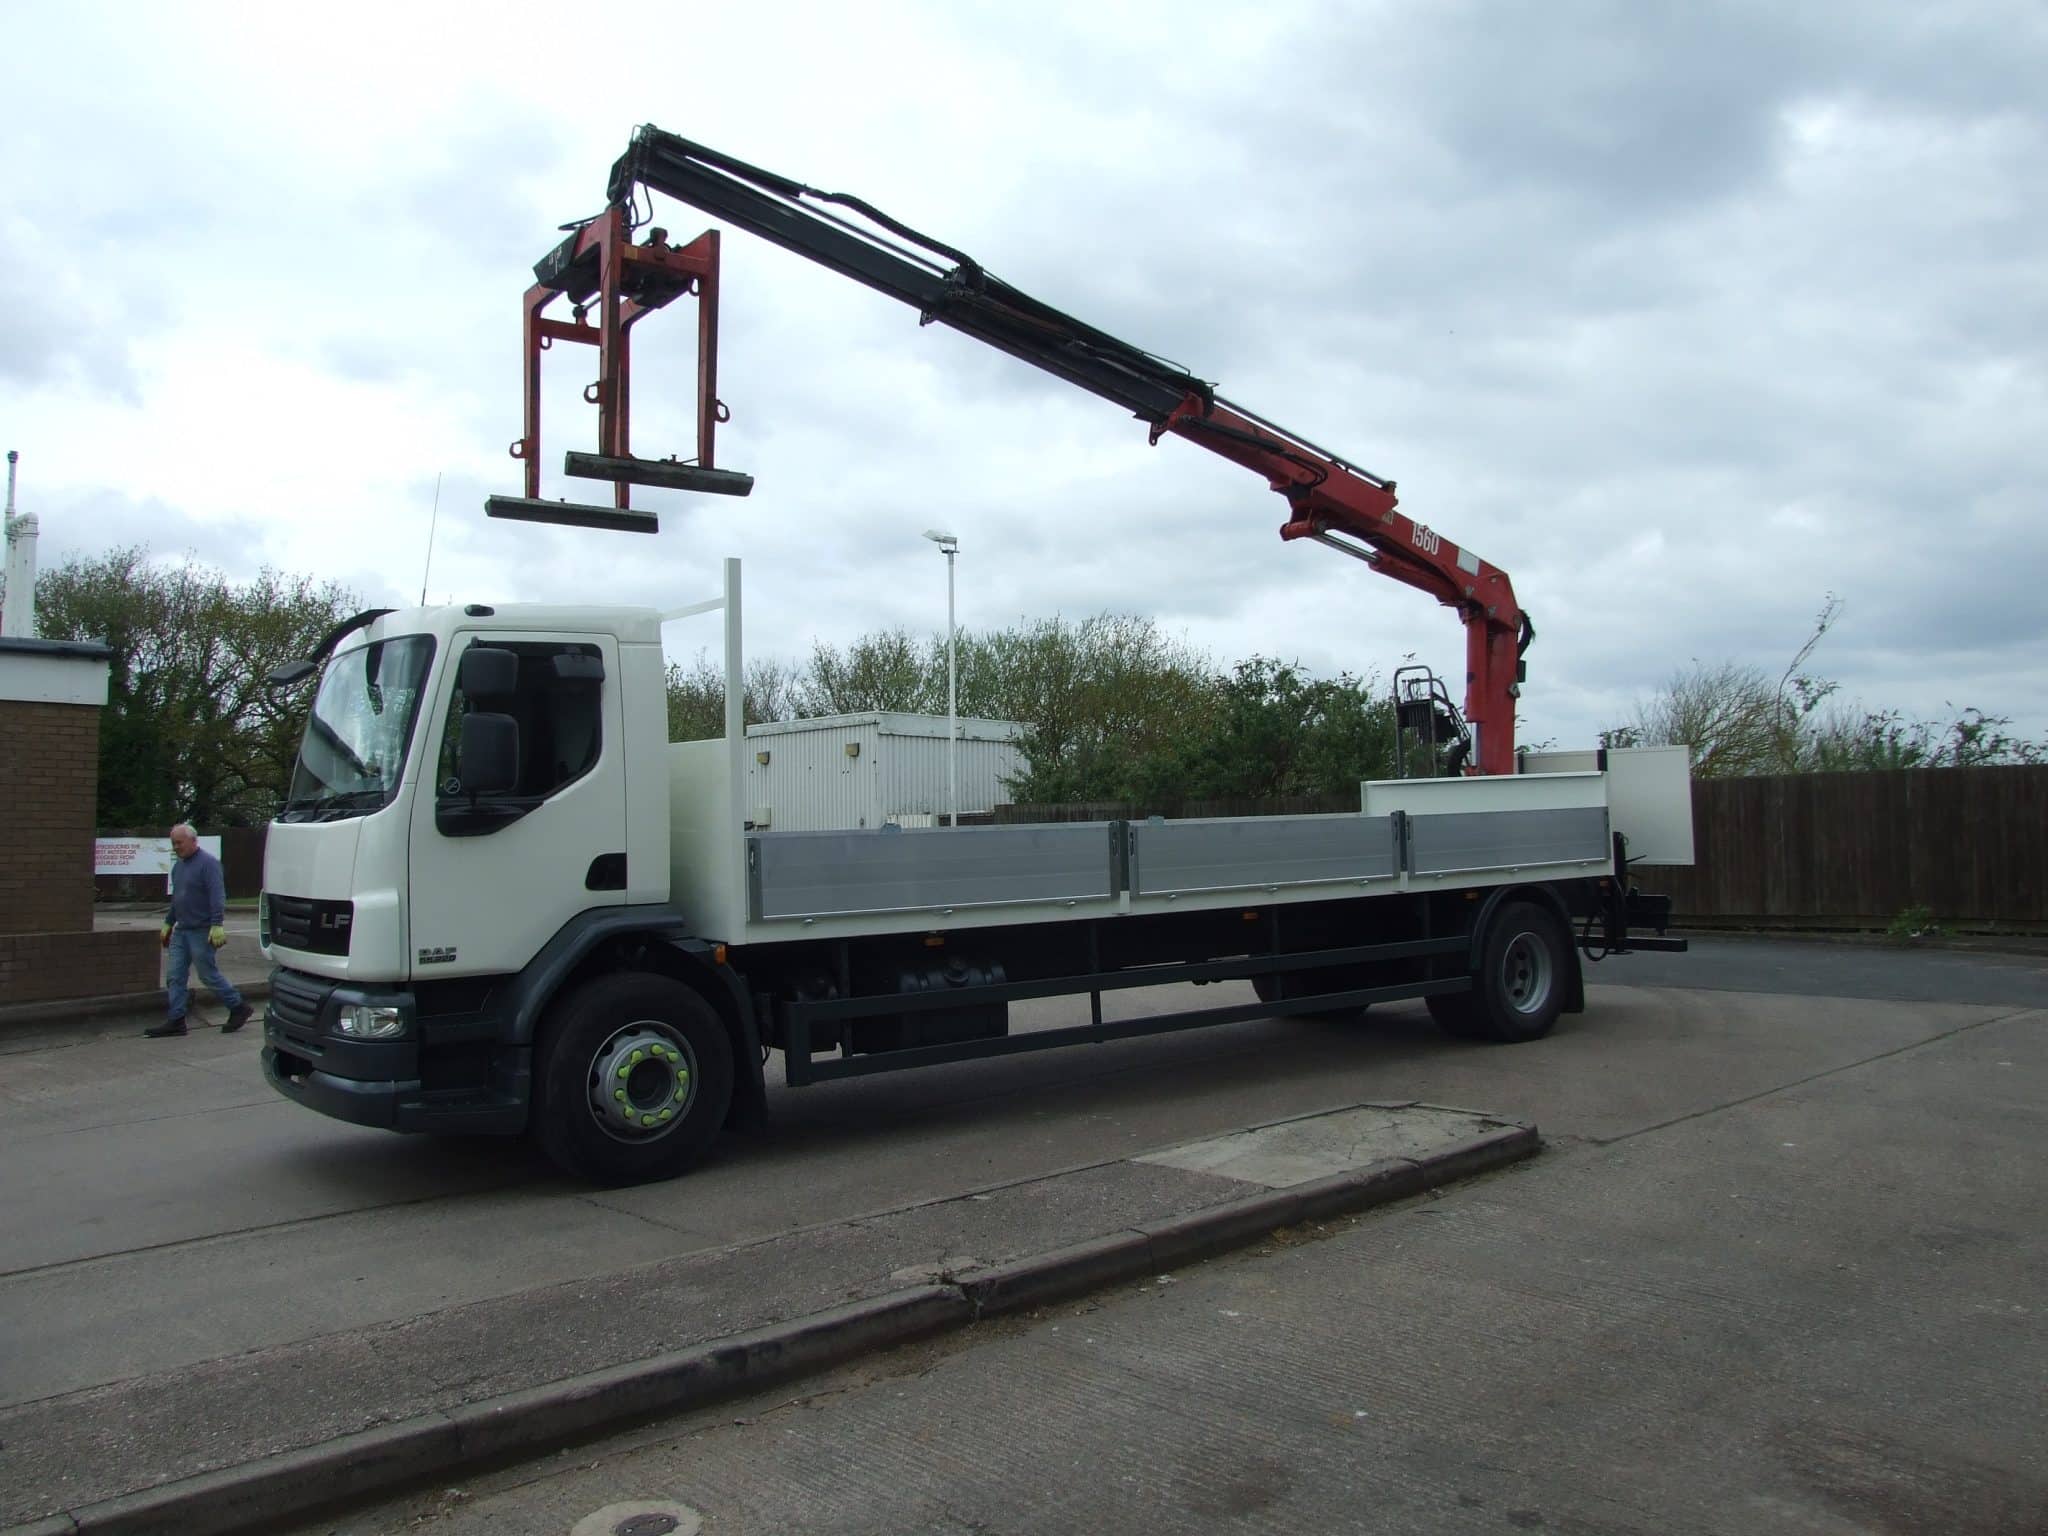 Passenger side view of used DAF crane truck